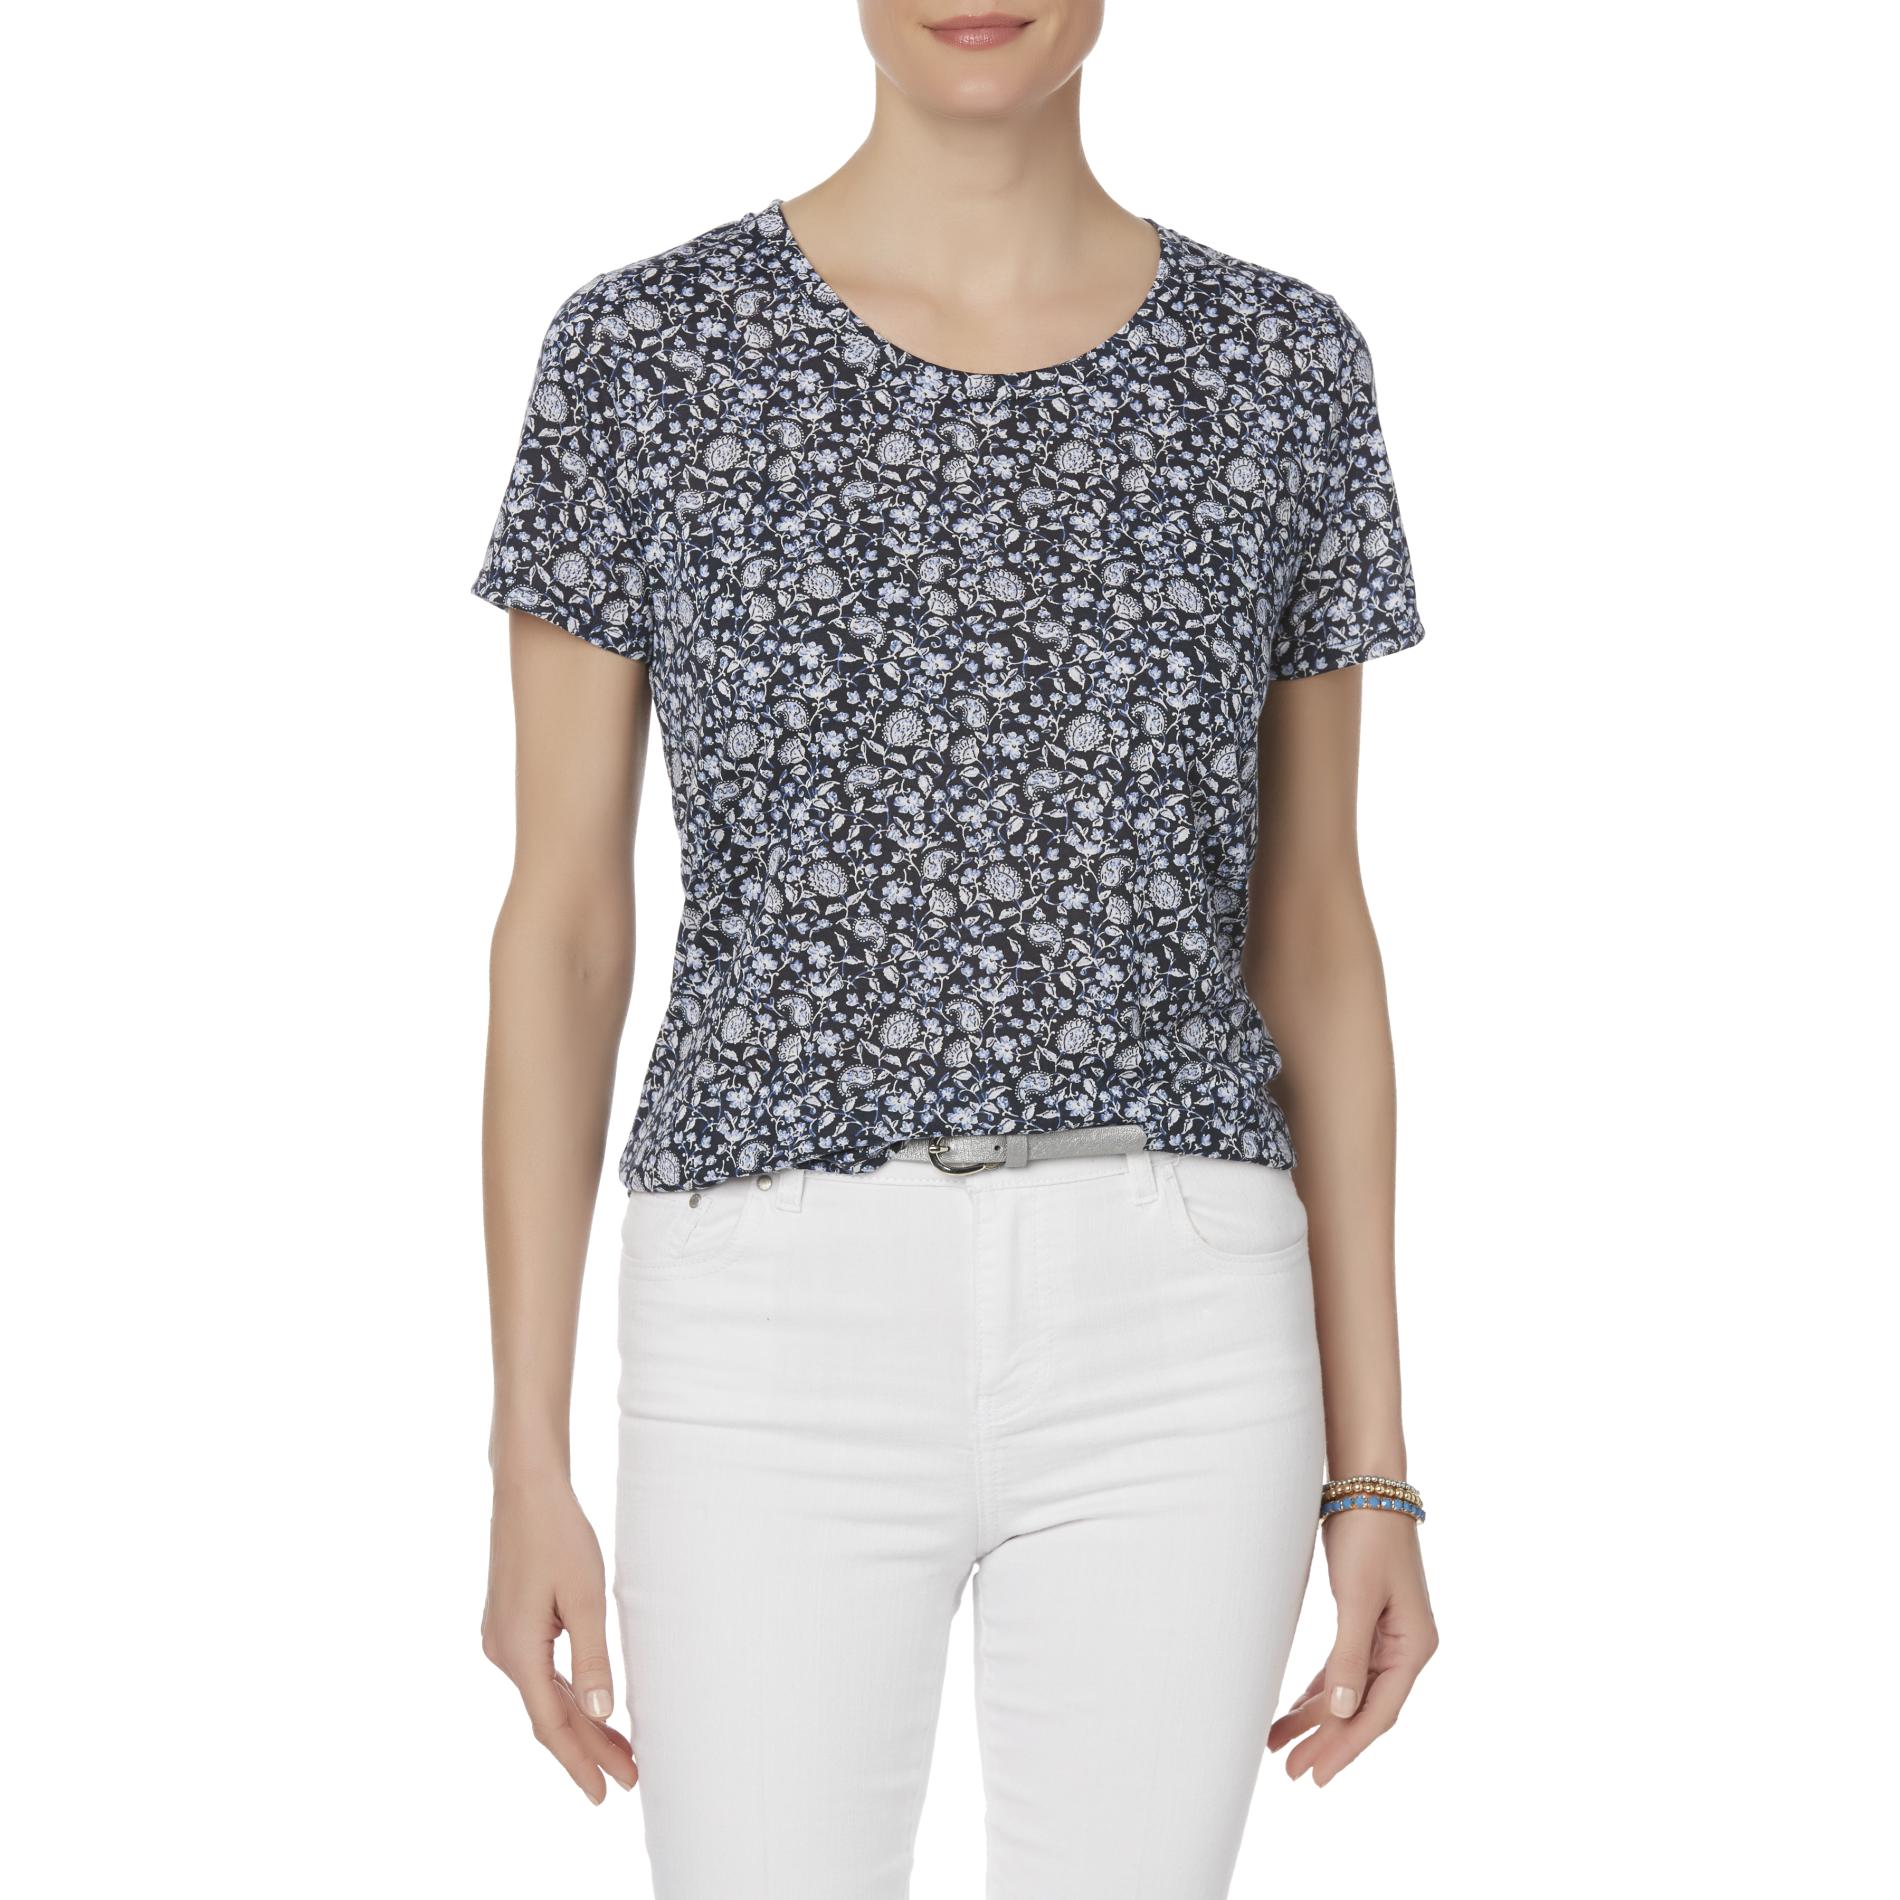 Simply Styled Women's Graphic T-Shirt - Paisley Floral